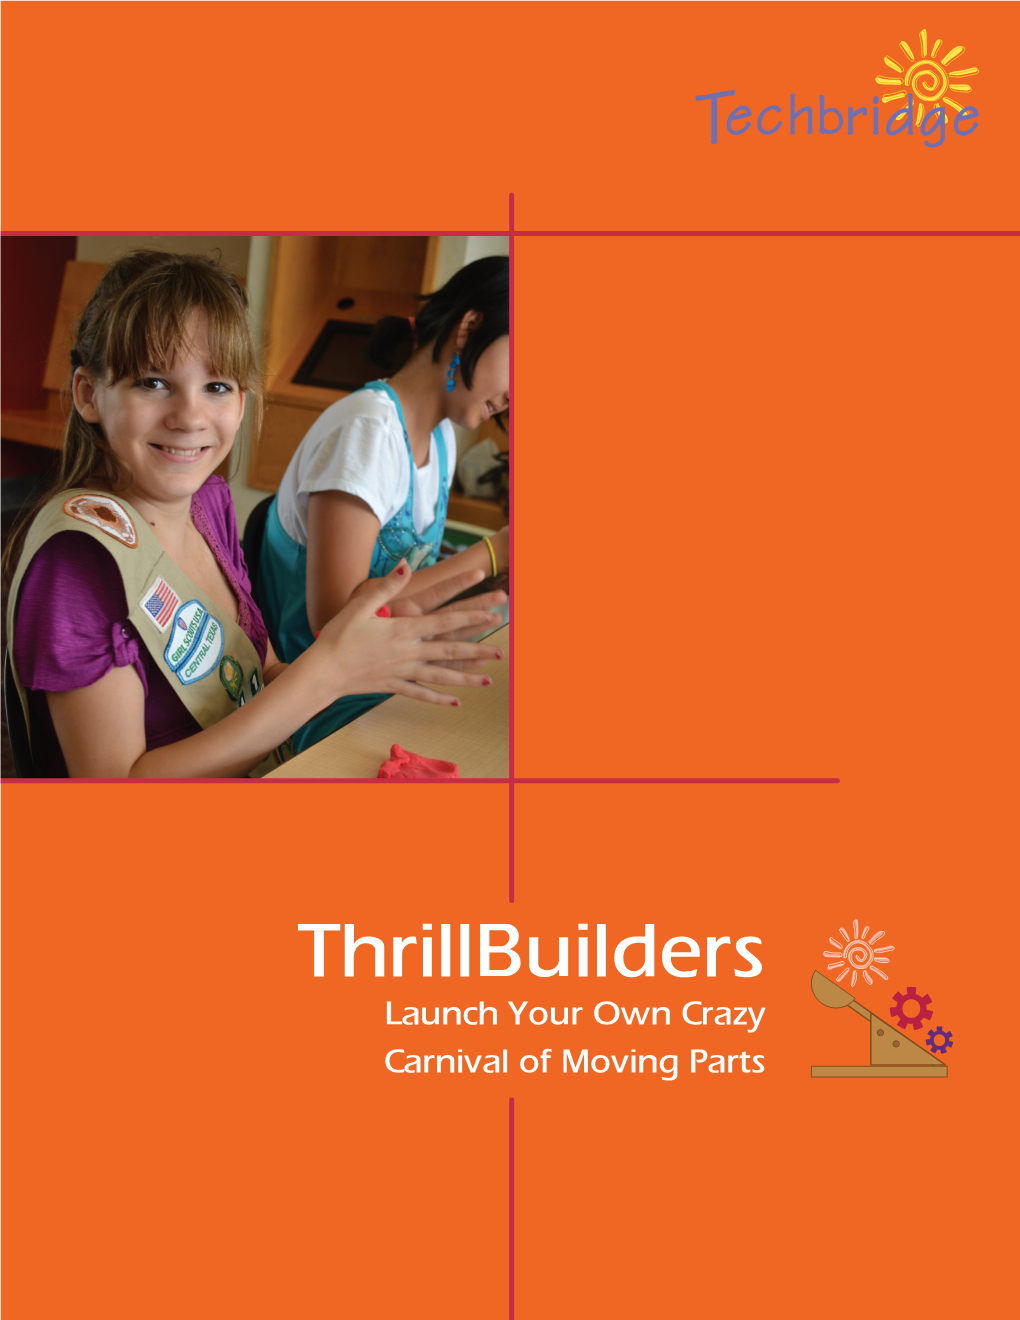 Thrillbuilders Launch Your Own Crazy Carnival of Moving Parts